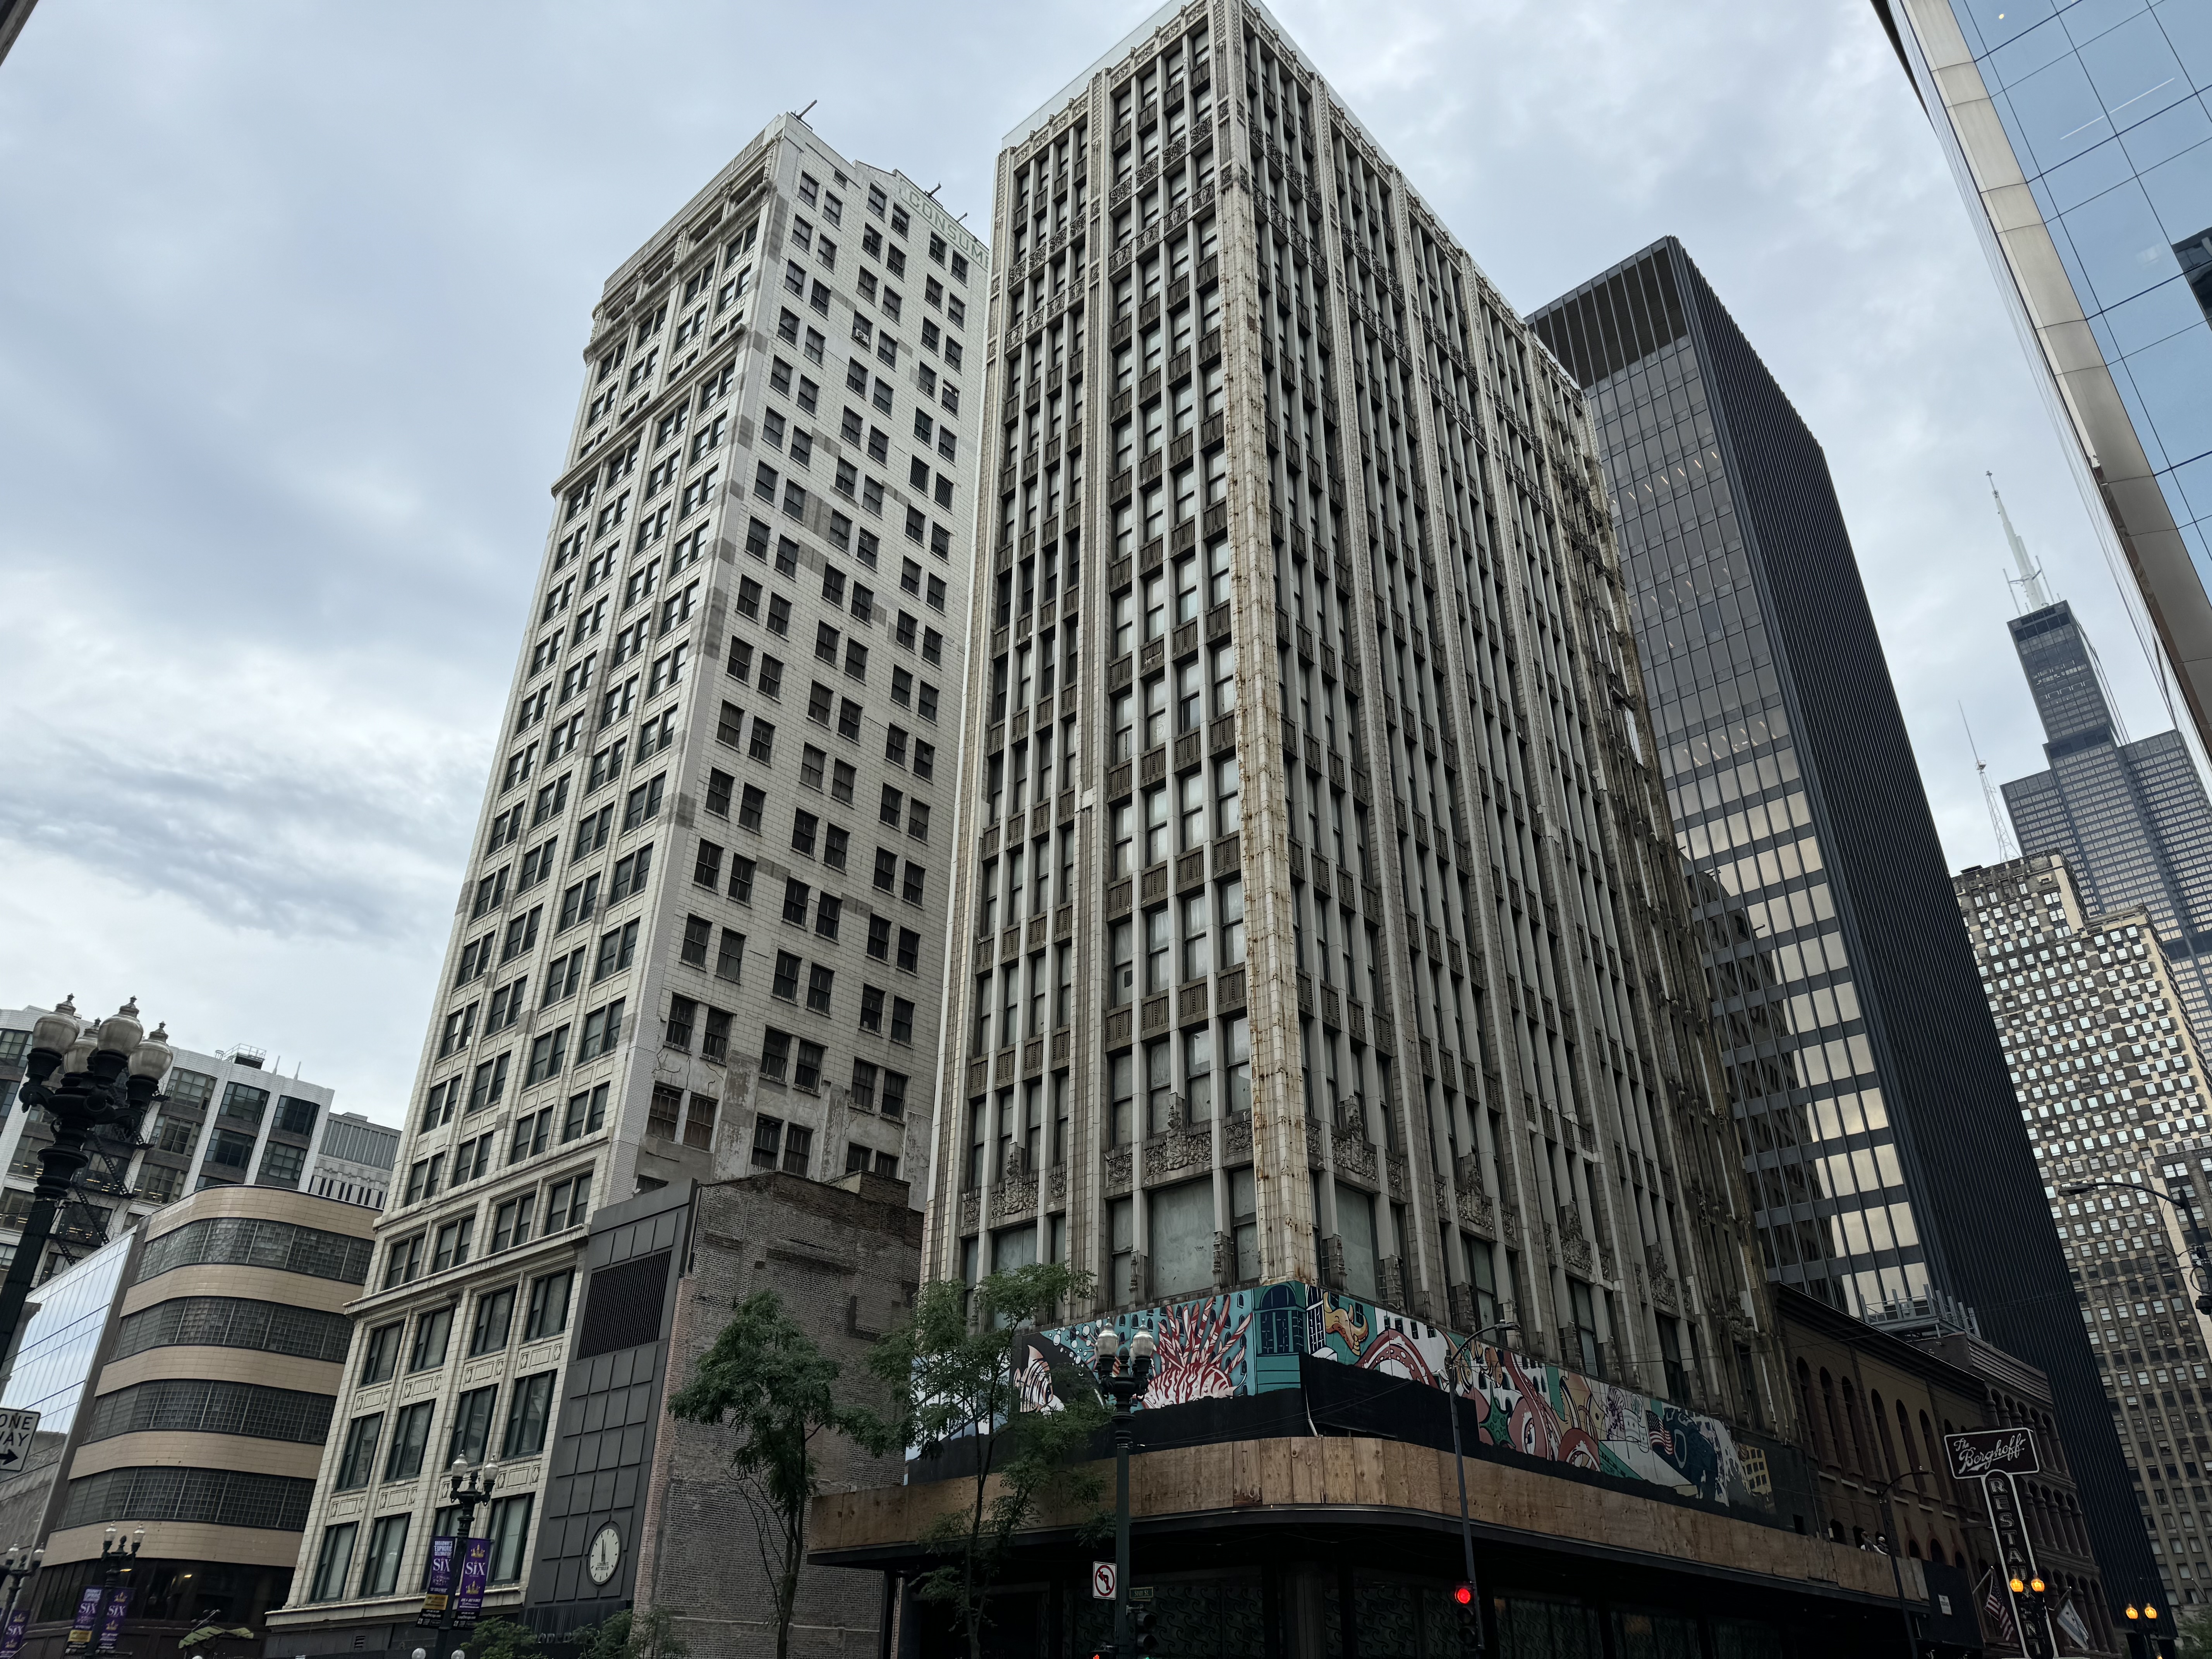 Image of two multi-story brick buildings located at 202 and 220 S. State Street Chicago with other skyscrapers in background..